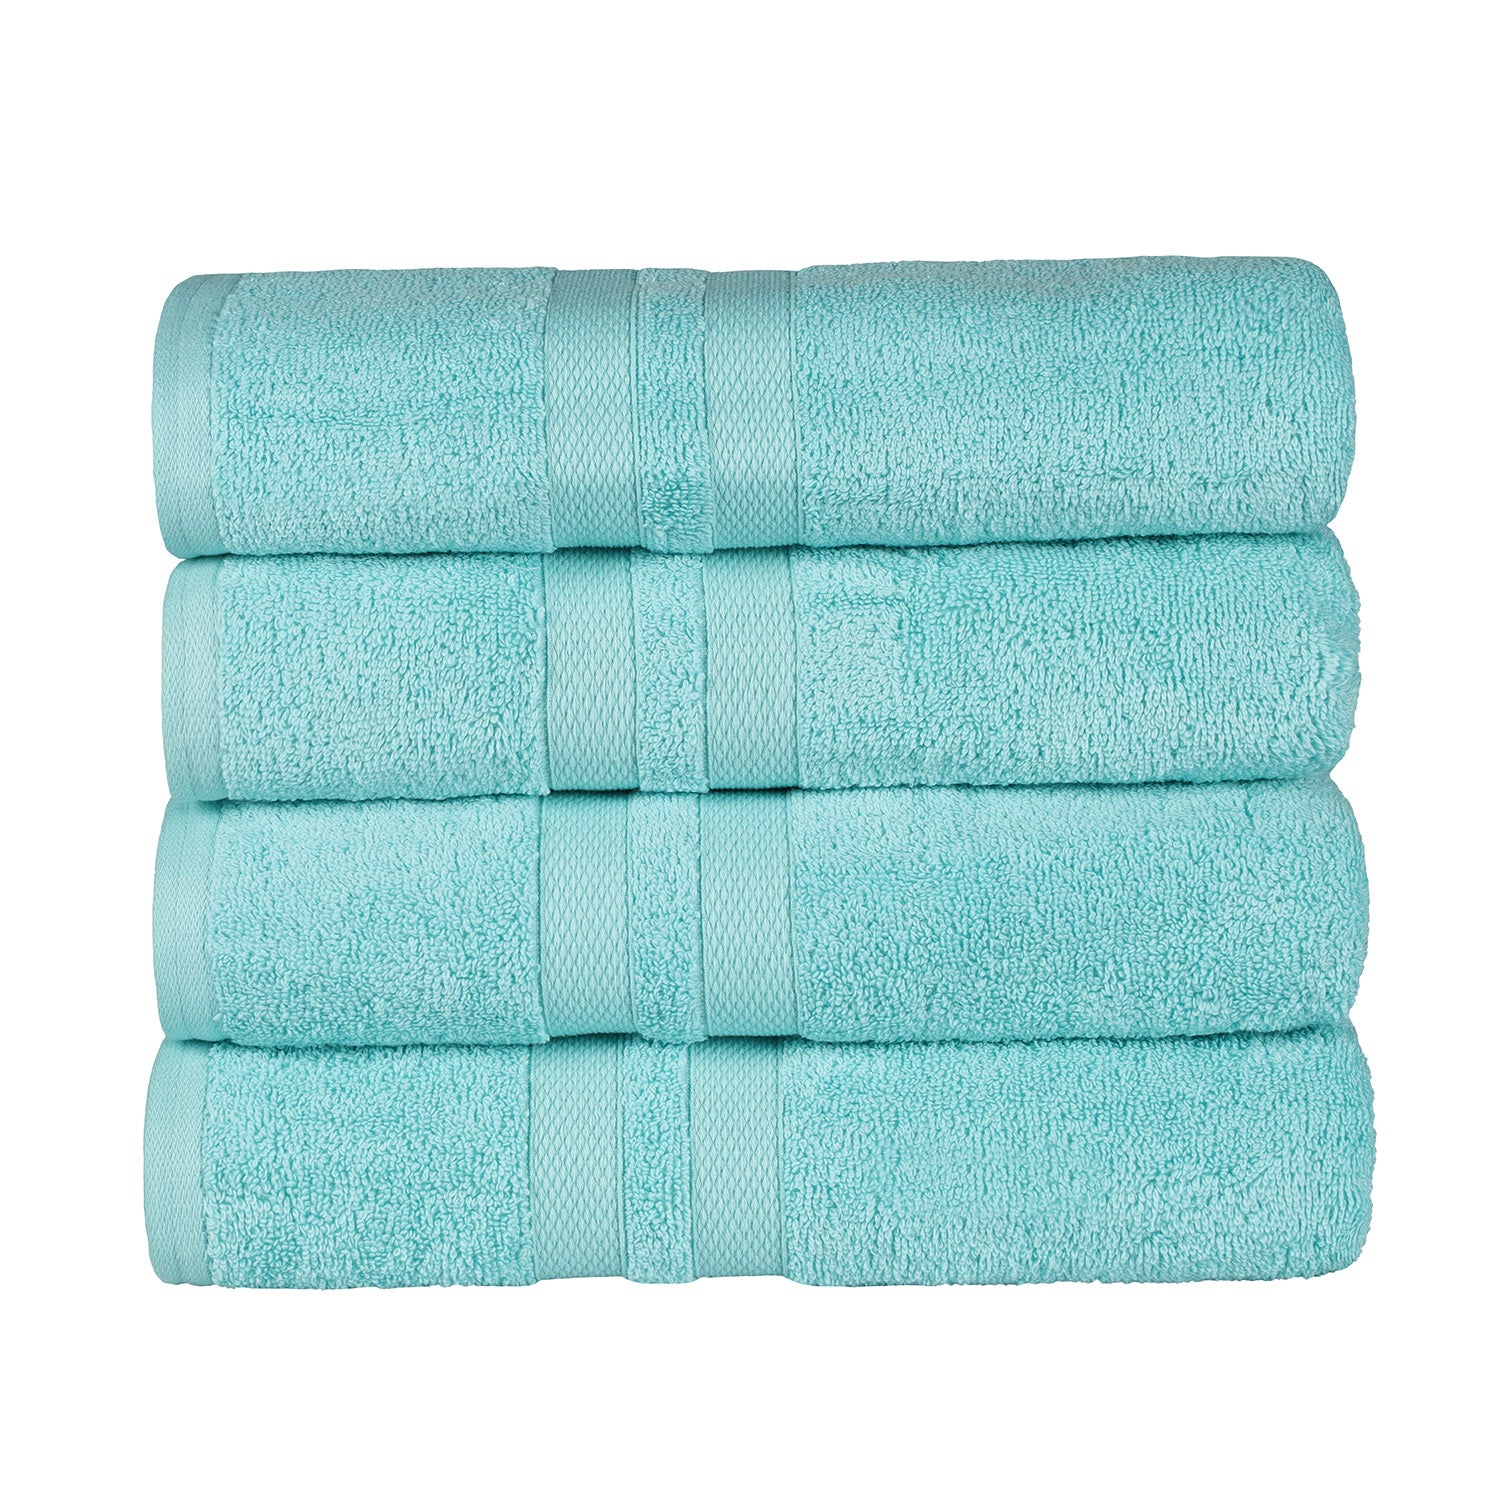 Superior Ultra Soft Cotton Absorbent Solid Bath Towel (Set of 4) -Cyan